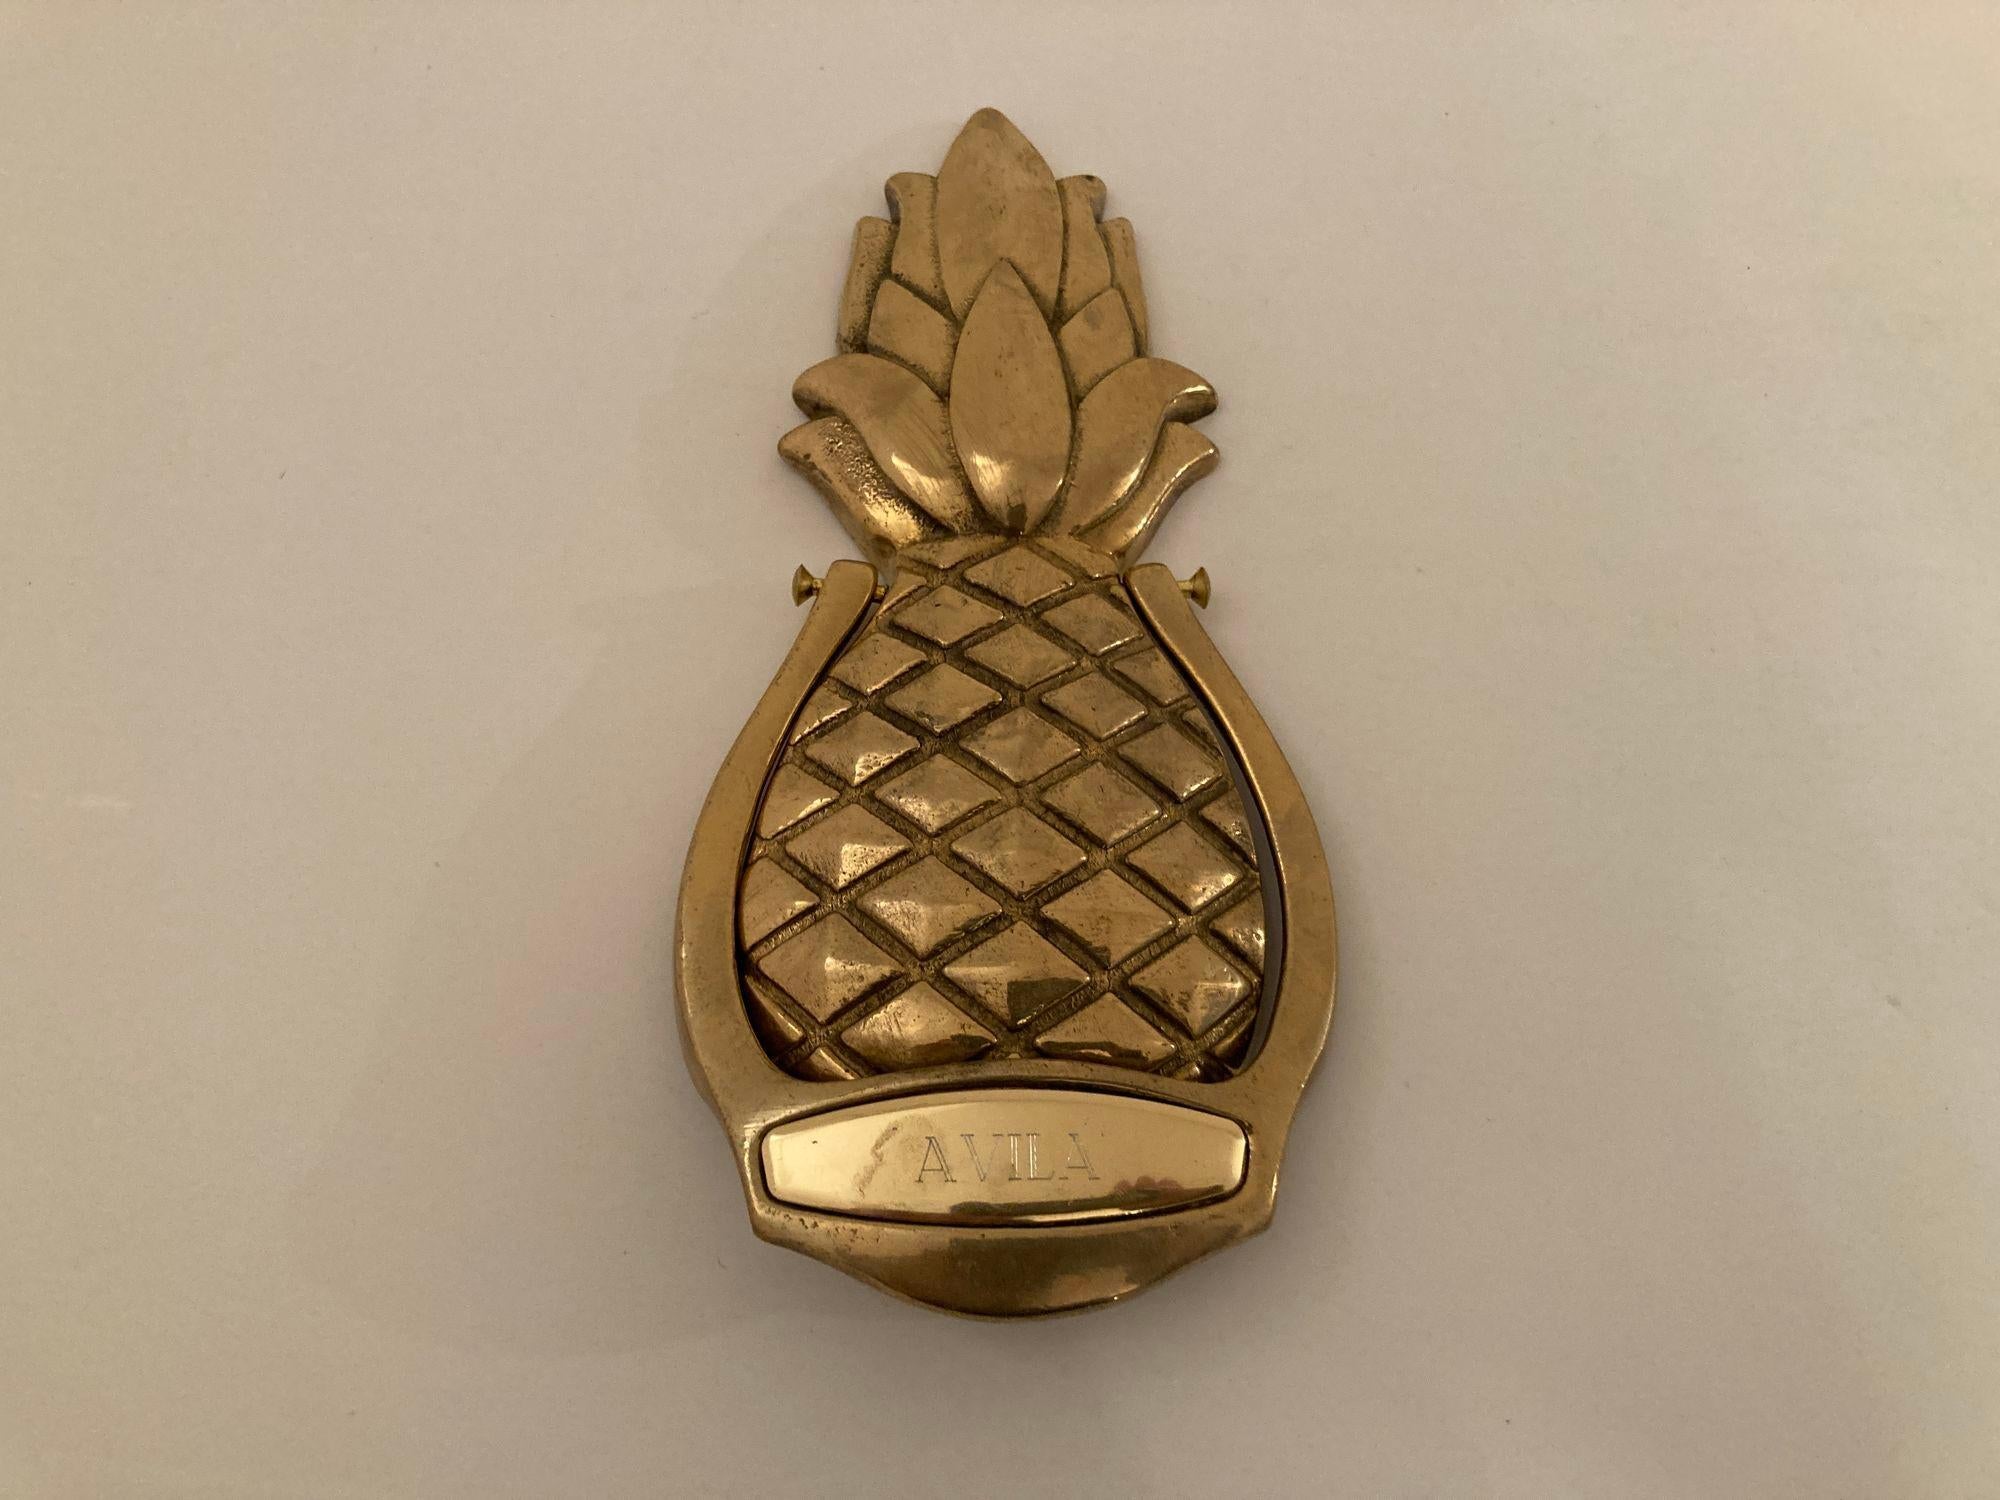 Vintage solid brass pineapple shaped door knocker.
Vintage Decorative Front Door knocker, make a fun first impression with this beautiful solid brass pineapple door knocker.
Dimensions: 3.5